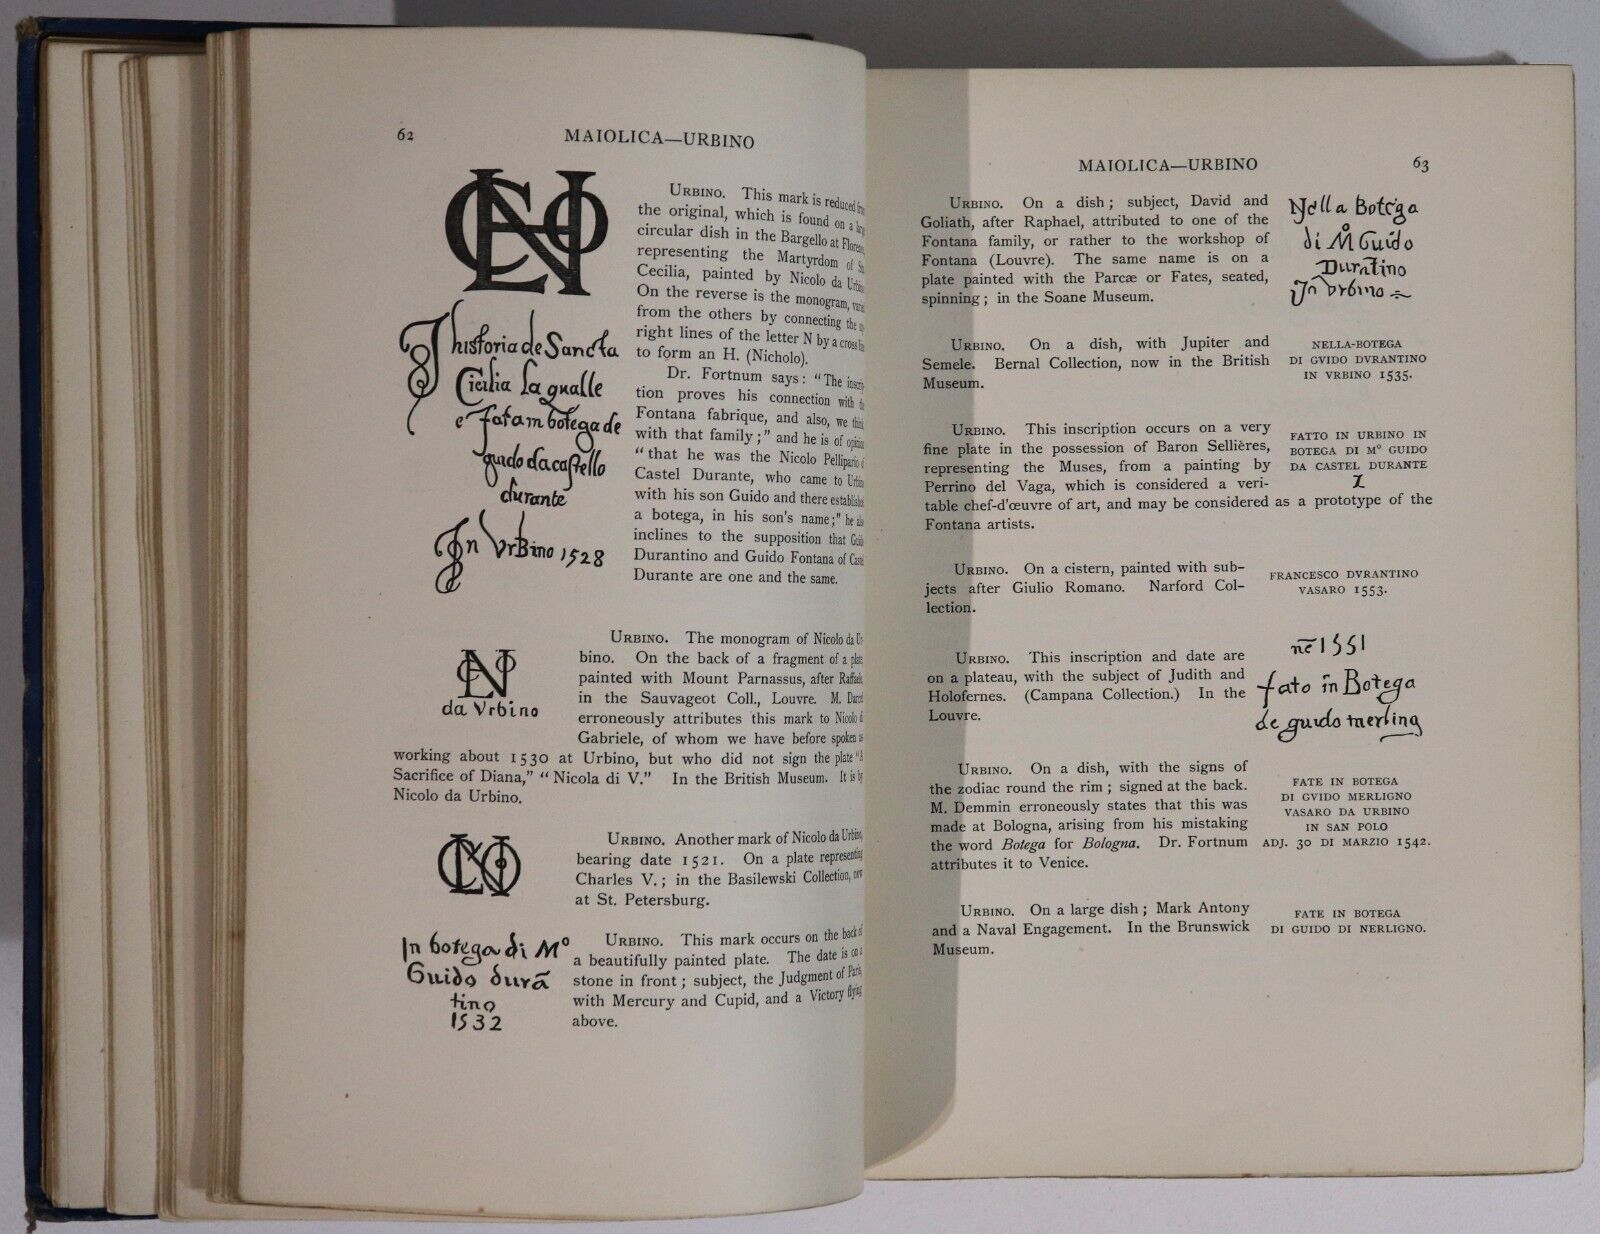 Marks & Monograms On Pottery & Porcelain - 1903 - Antique Reference Book